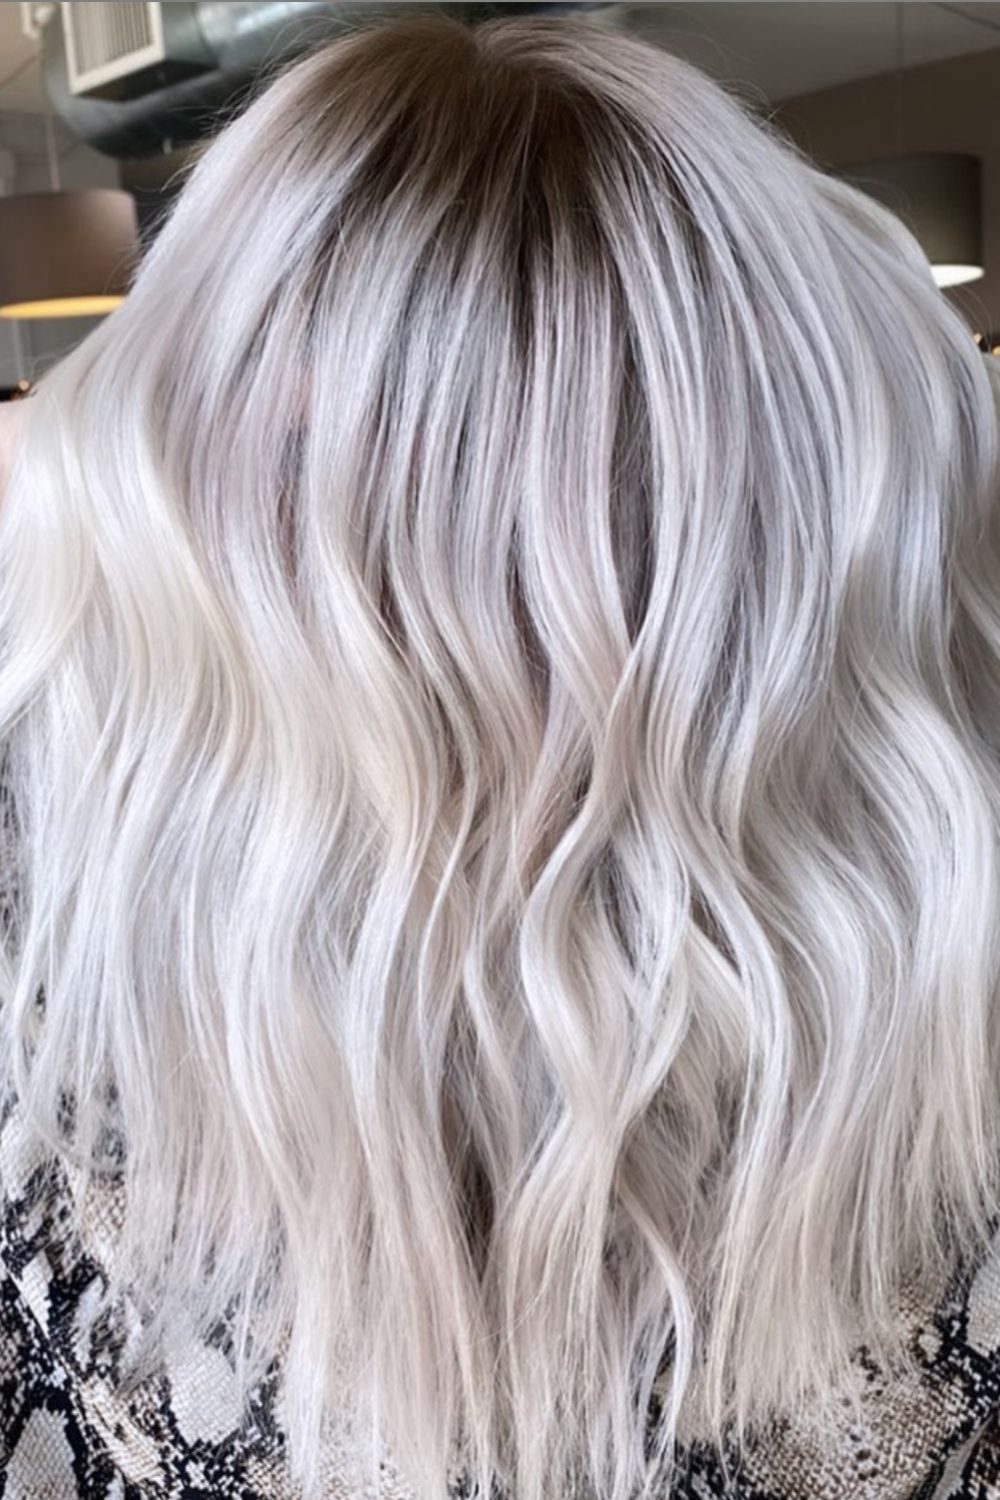 44 Best Fall hair colors and hair dye ideas for 2021! - Page 7 of 7